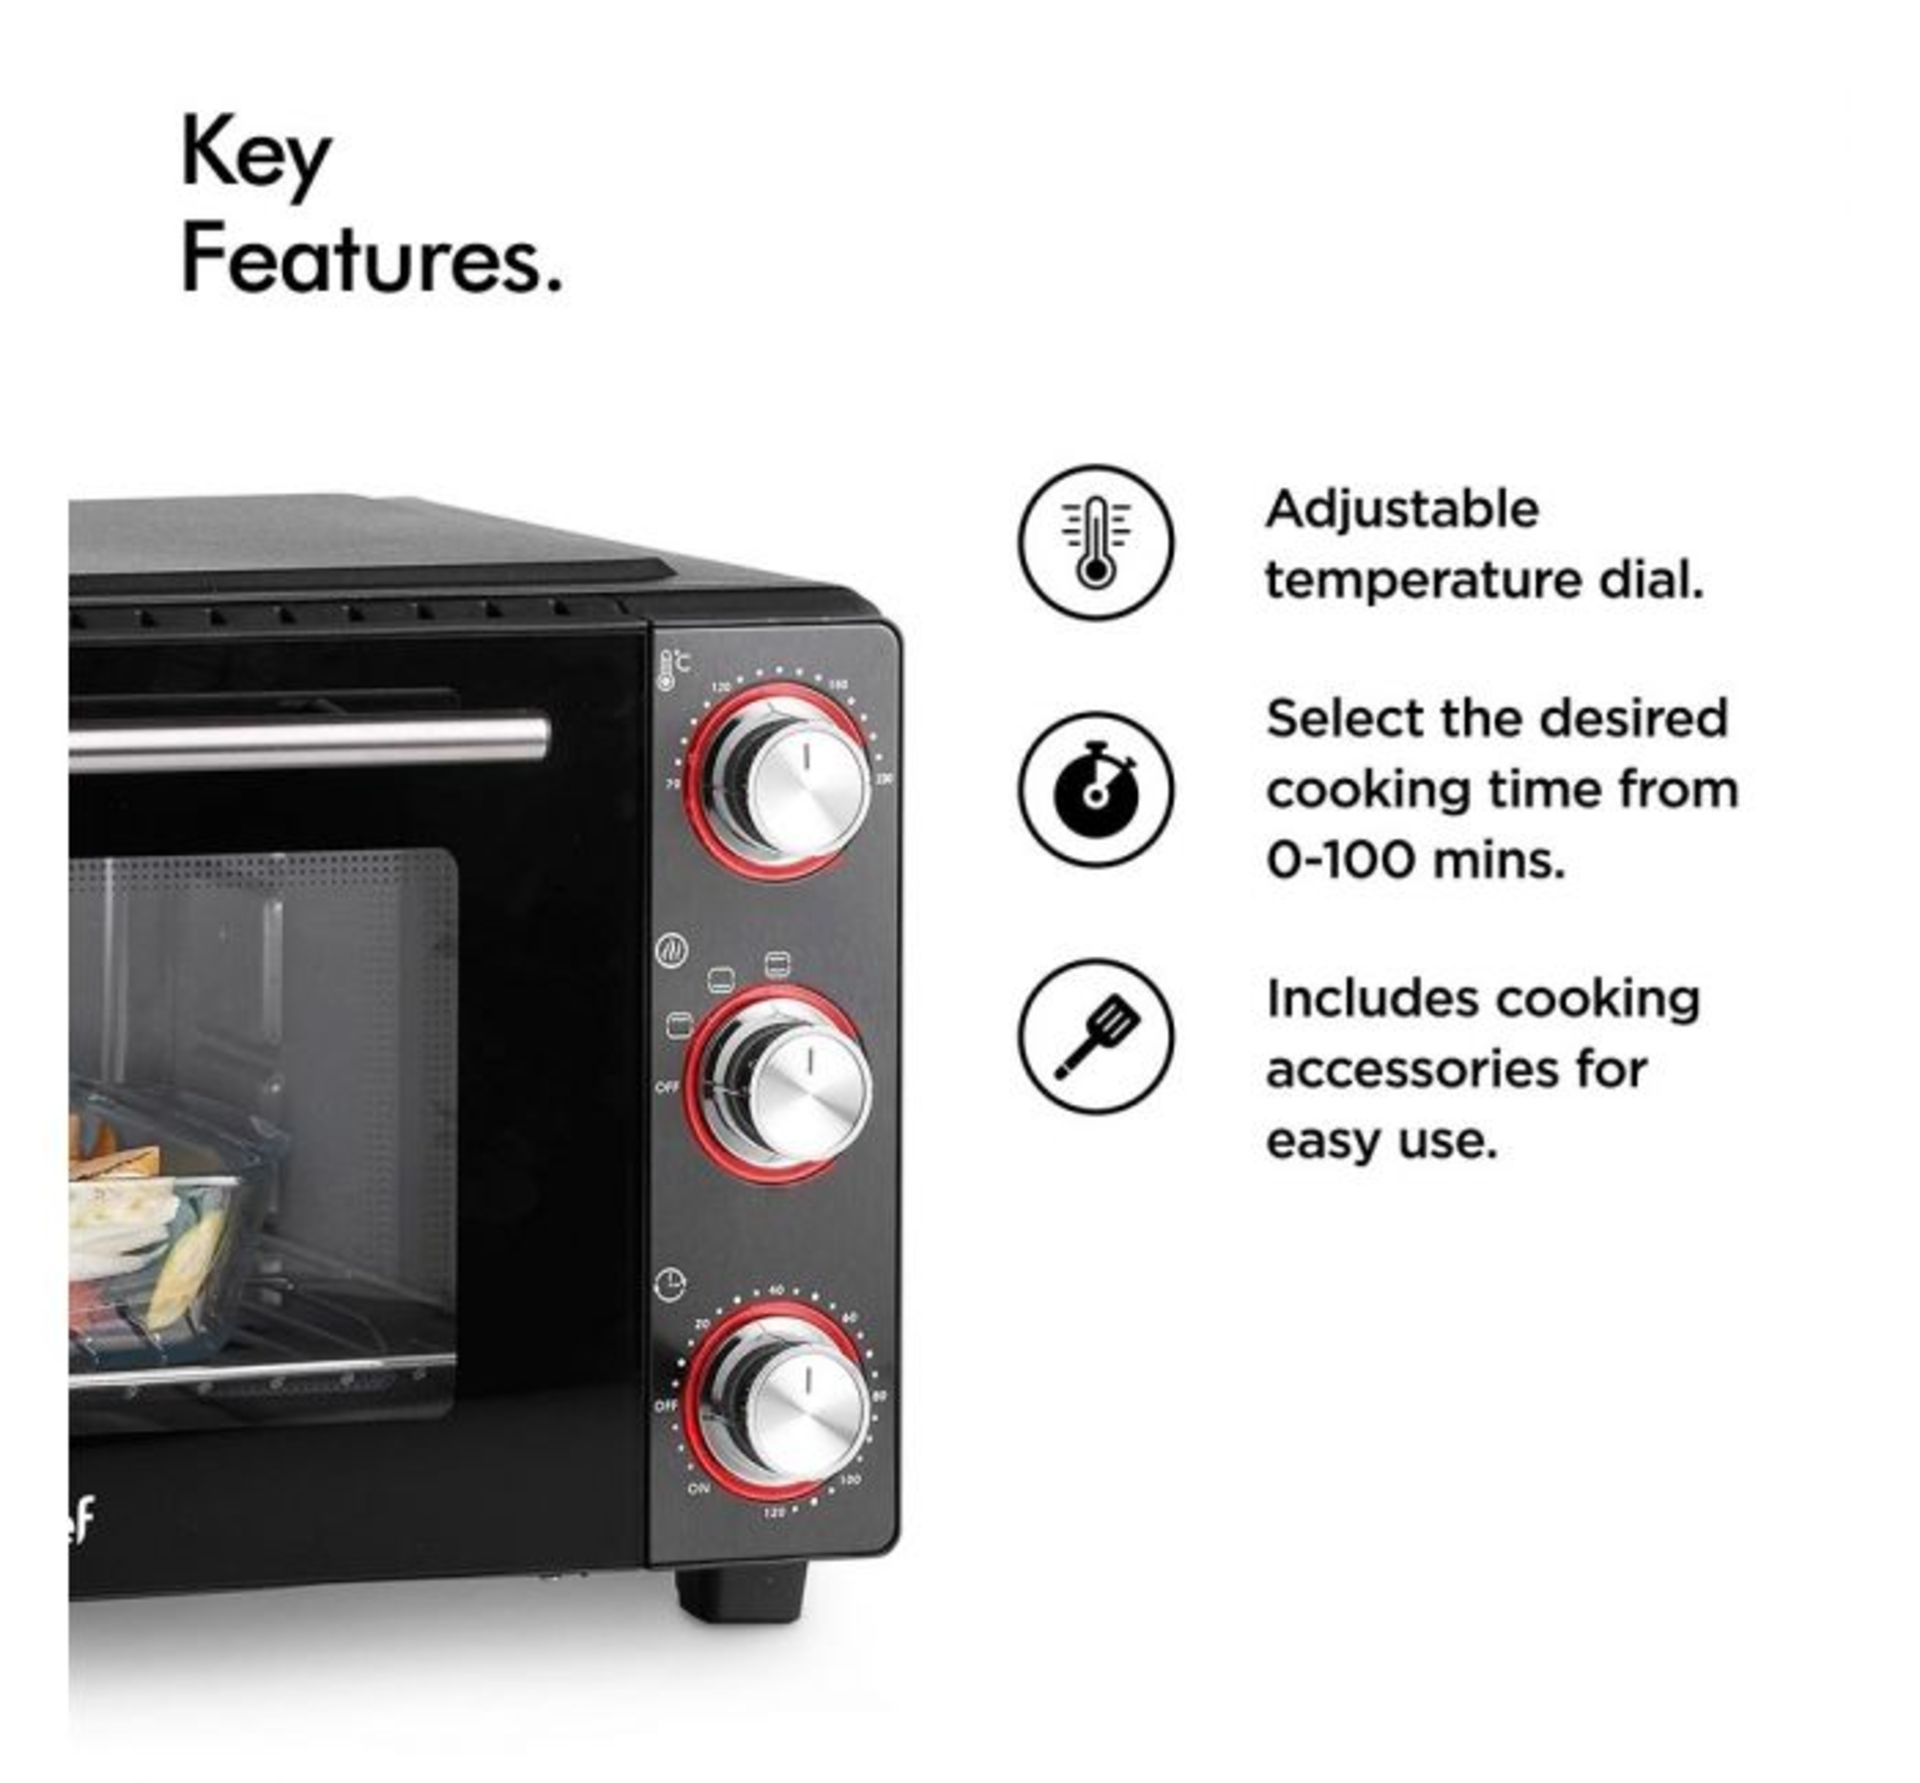 (HZ140) 28L Mini Oven Cooker & Grill 28L capacity and unobtrusive size makes it ideal for spac... - Image 3 of 3